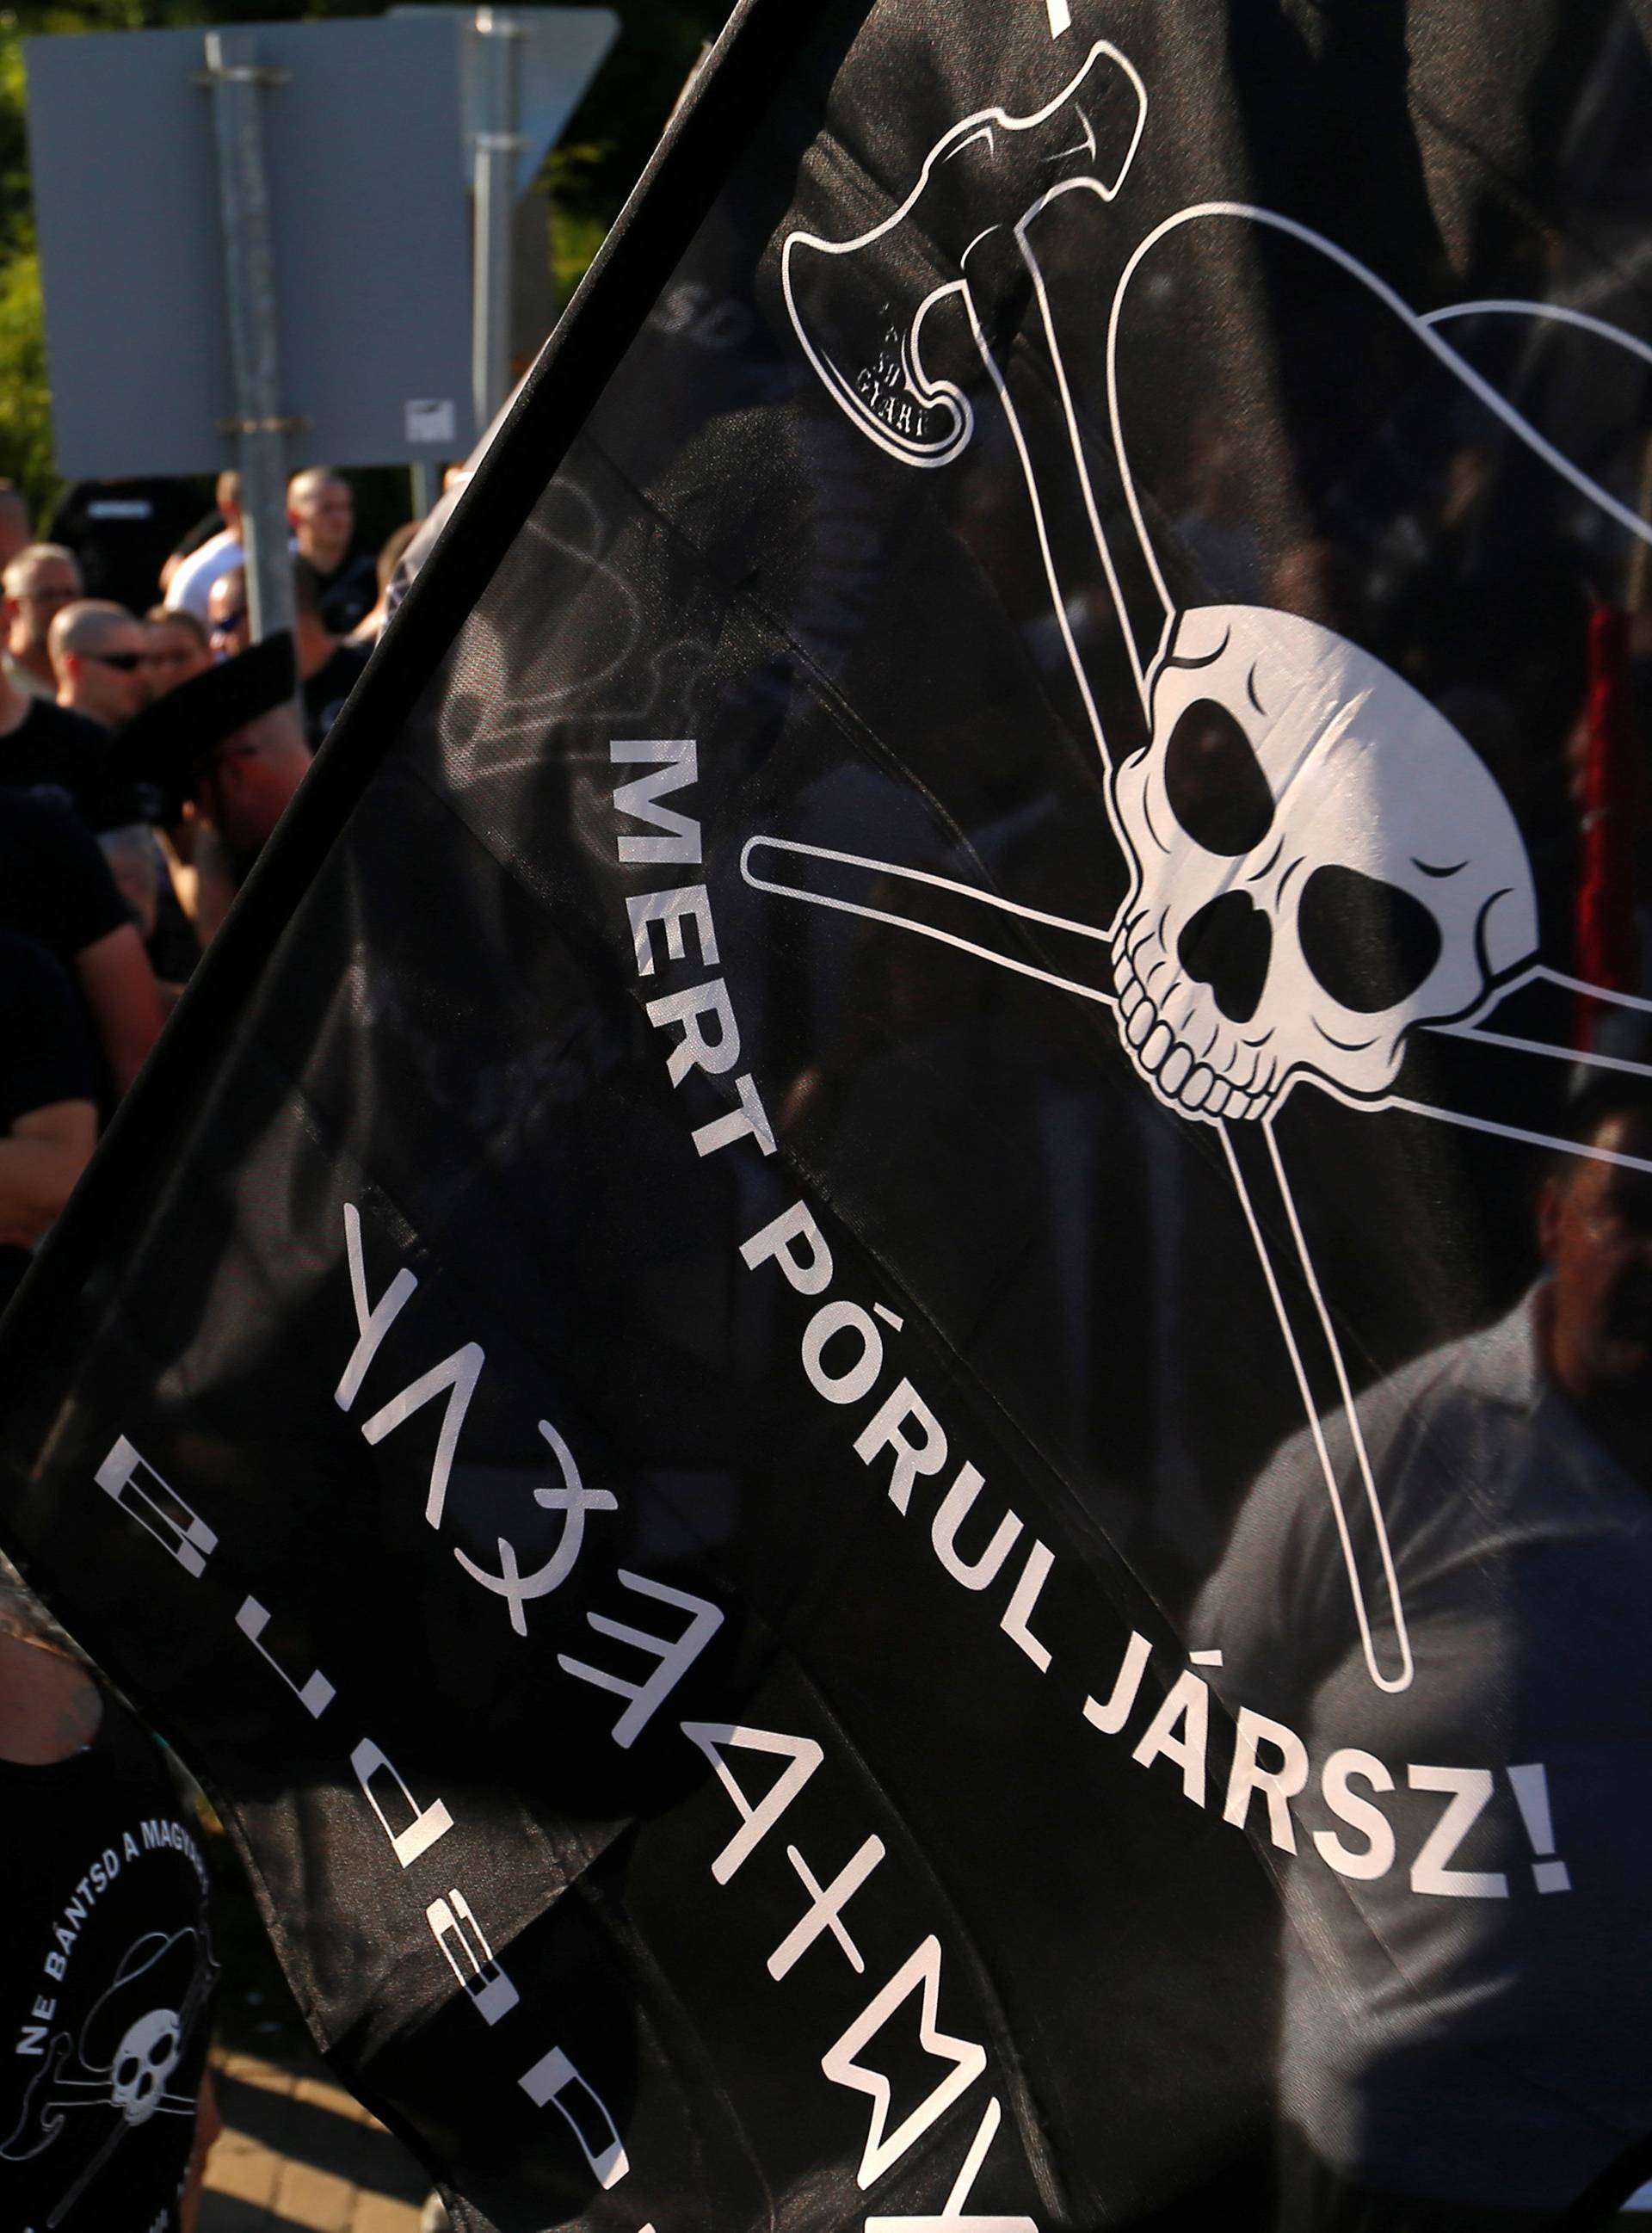 Activists attend the launch of a new Hungarian extreme right group, to be called Force and Determination, at a rally in Vecses